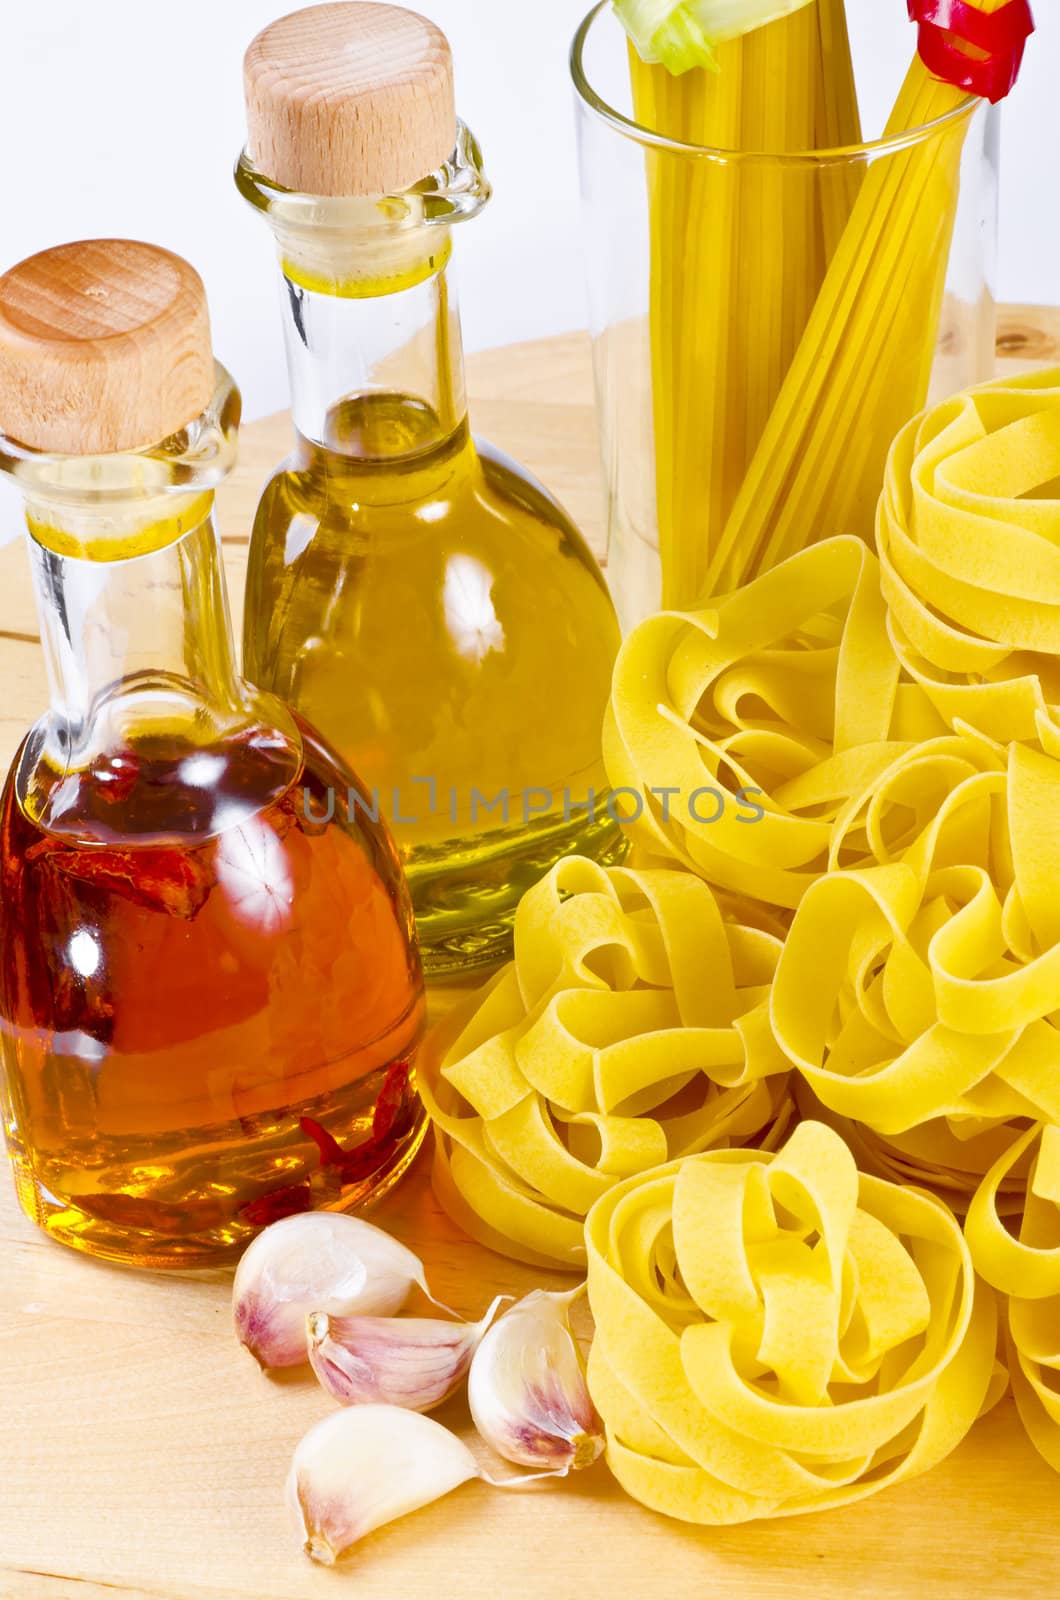 Pappardelle and Spaghetti